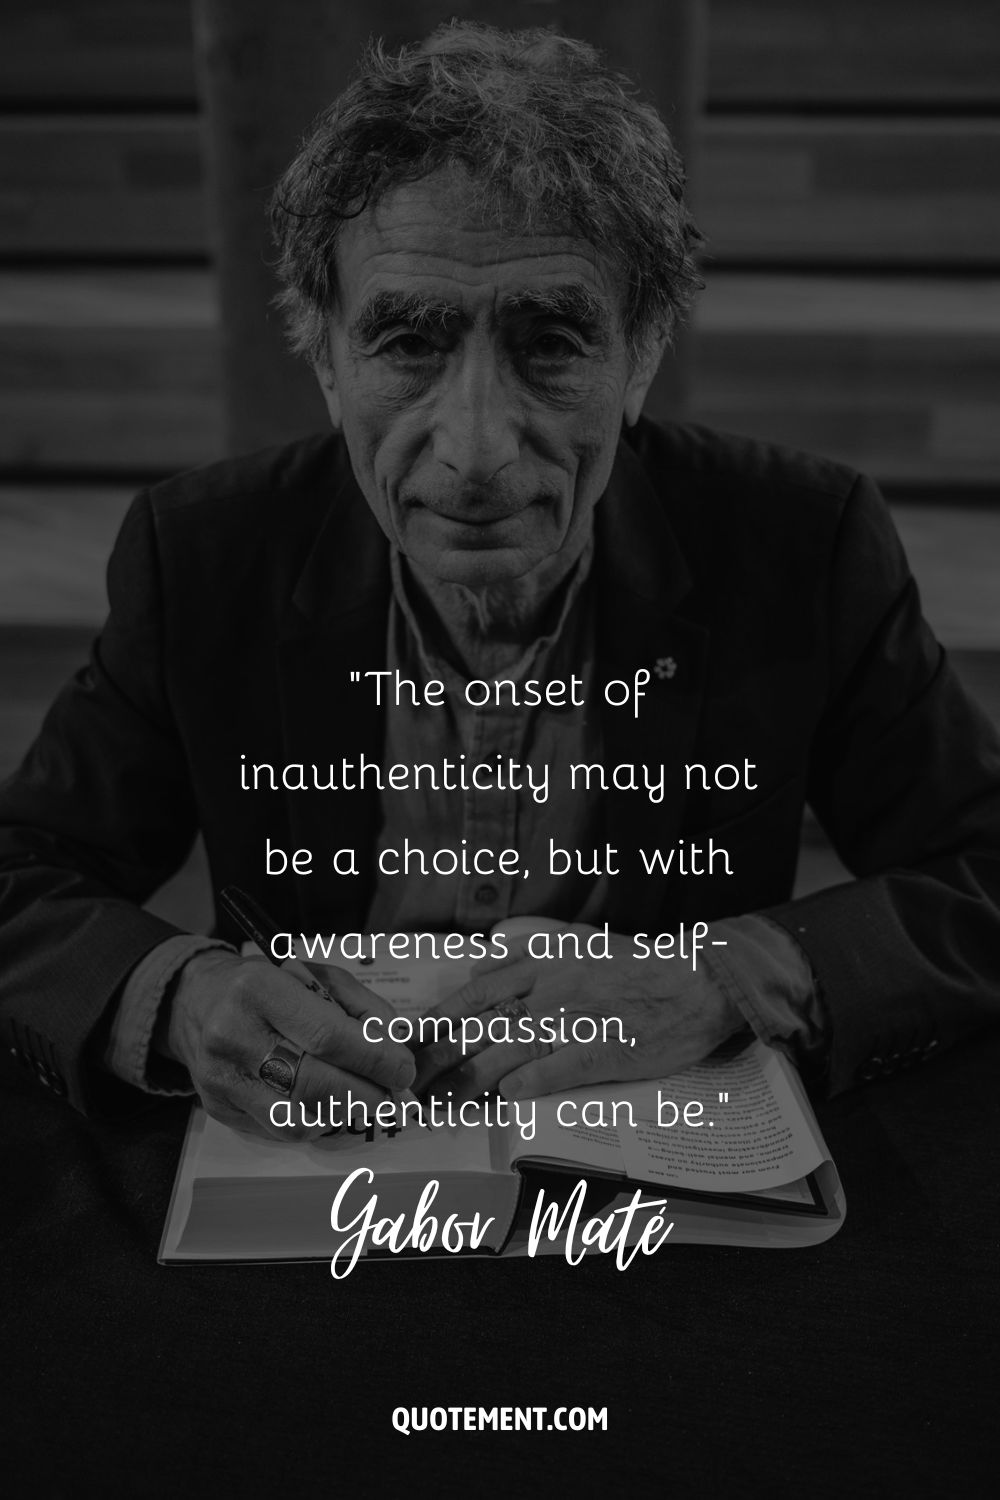 Gabor Mate writing on a book representing a wise Gabor Mate quote
